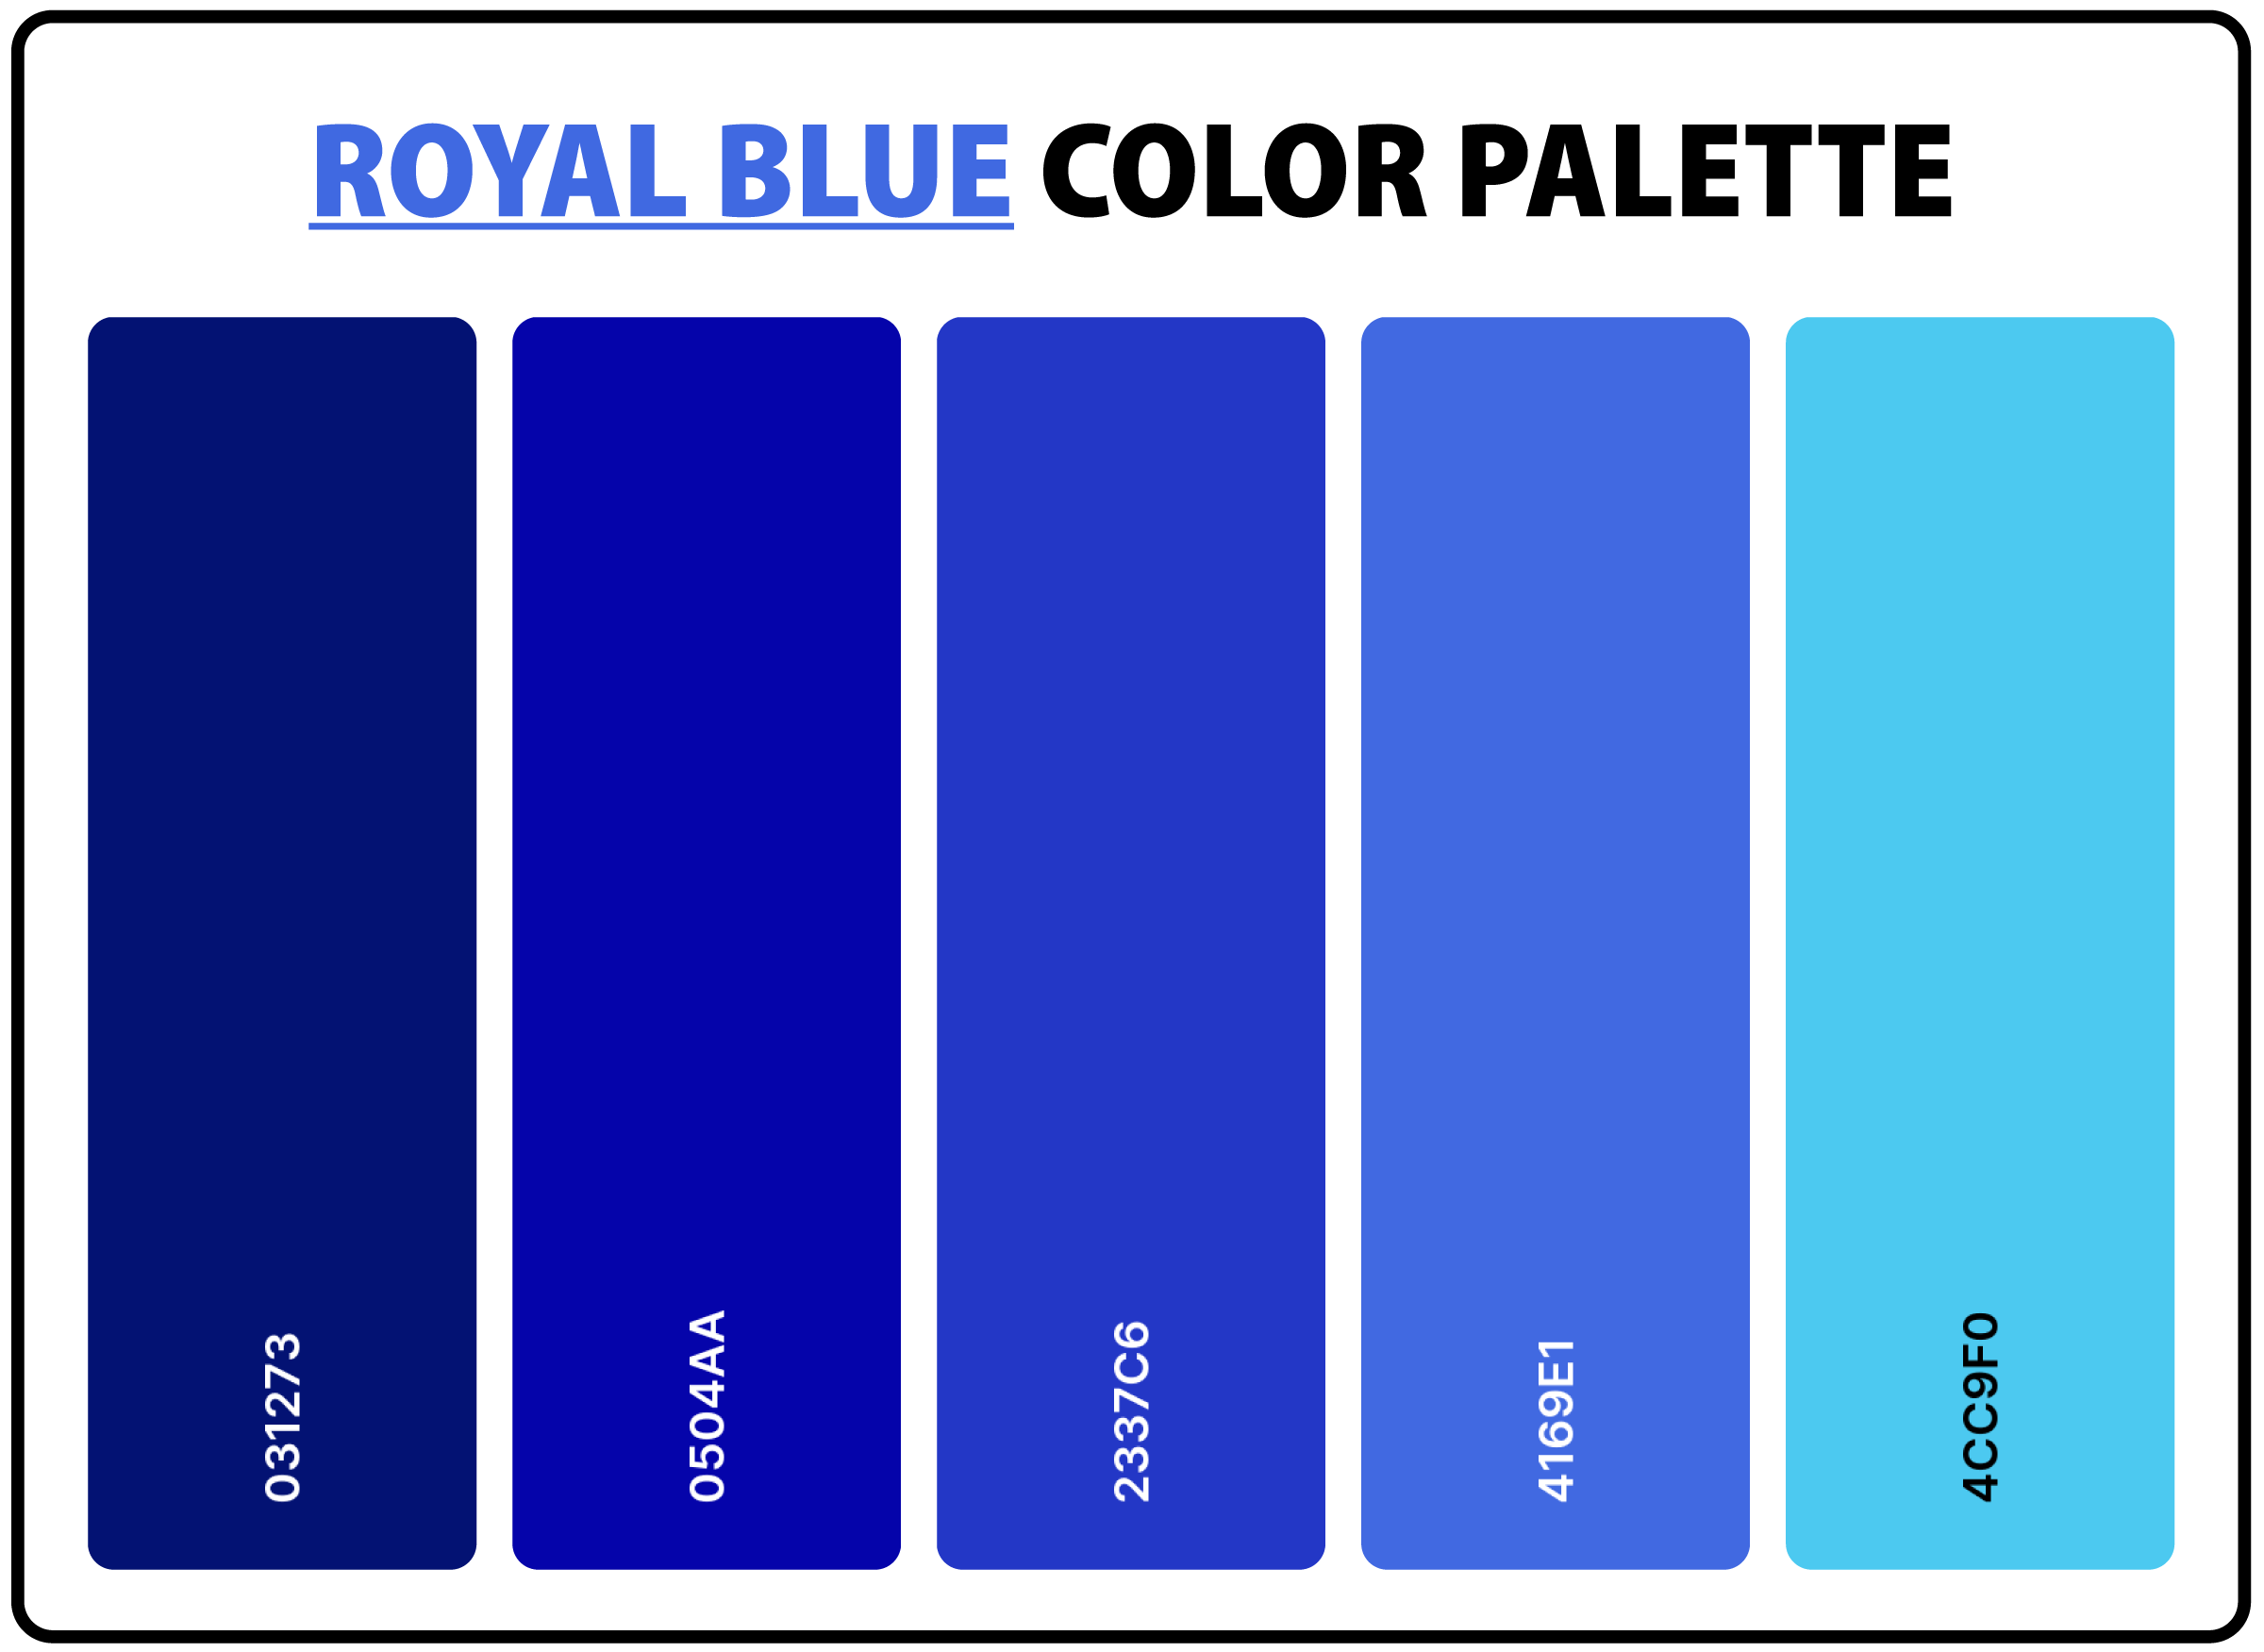 3. "The Best Royal Blue Hair Dyes for Vibrant Color" - wide 7